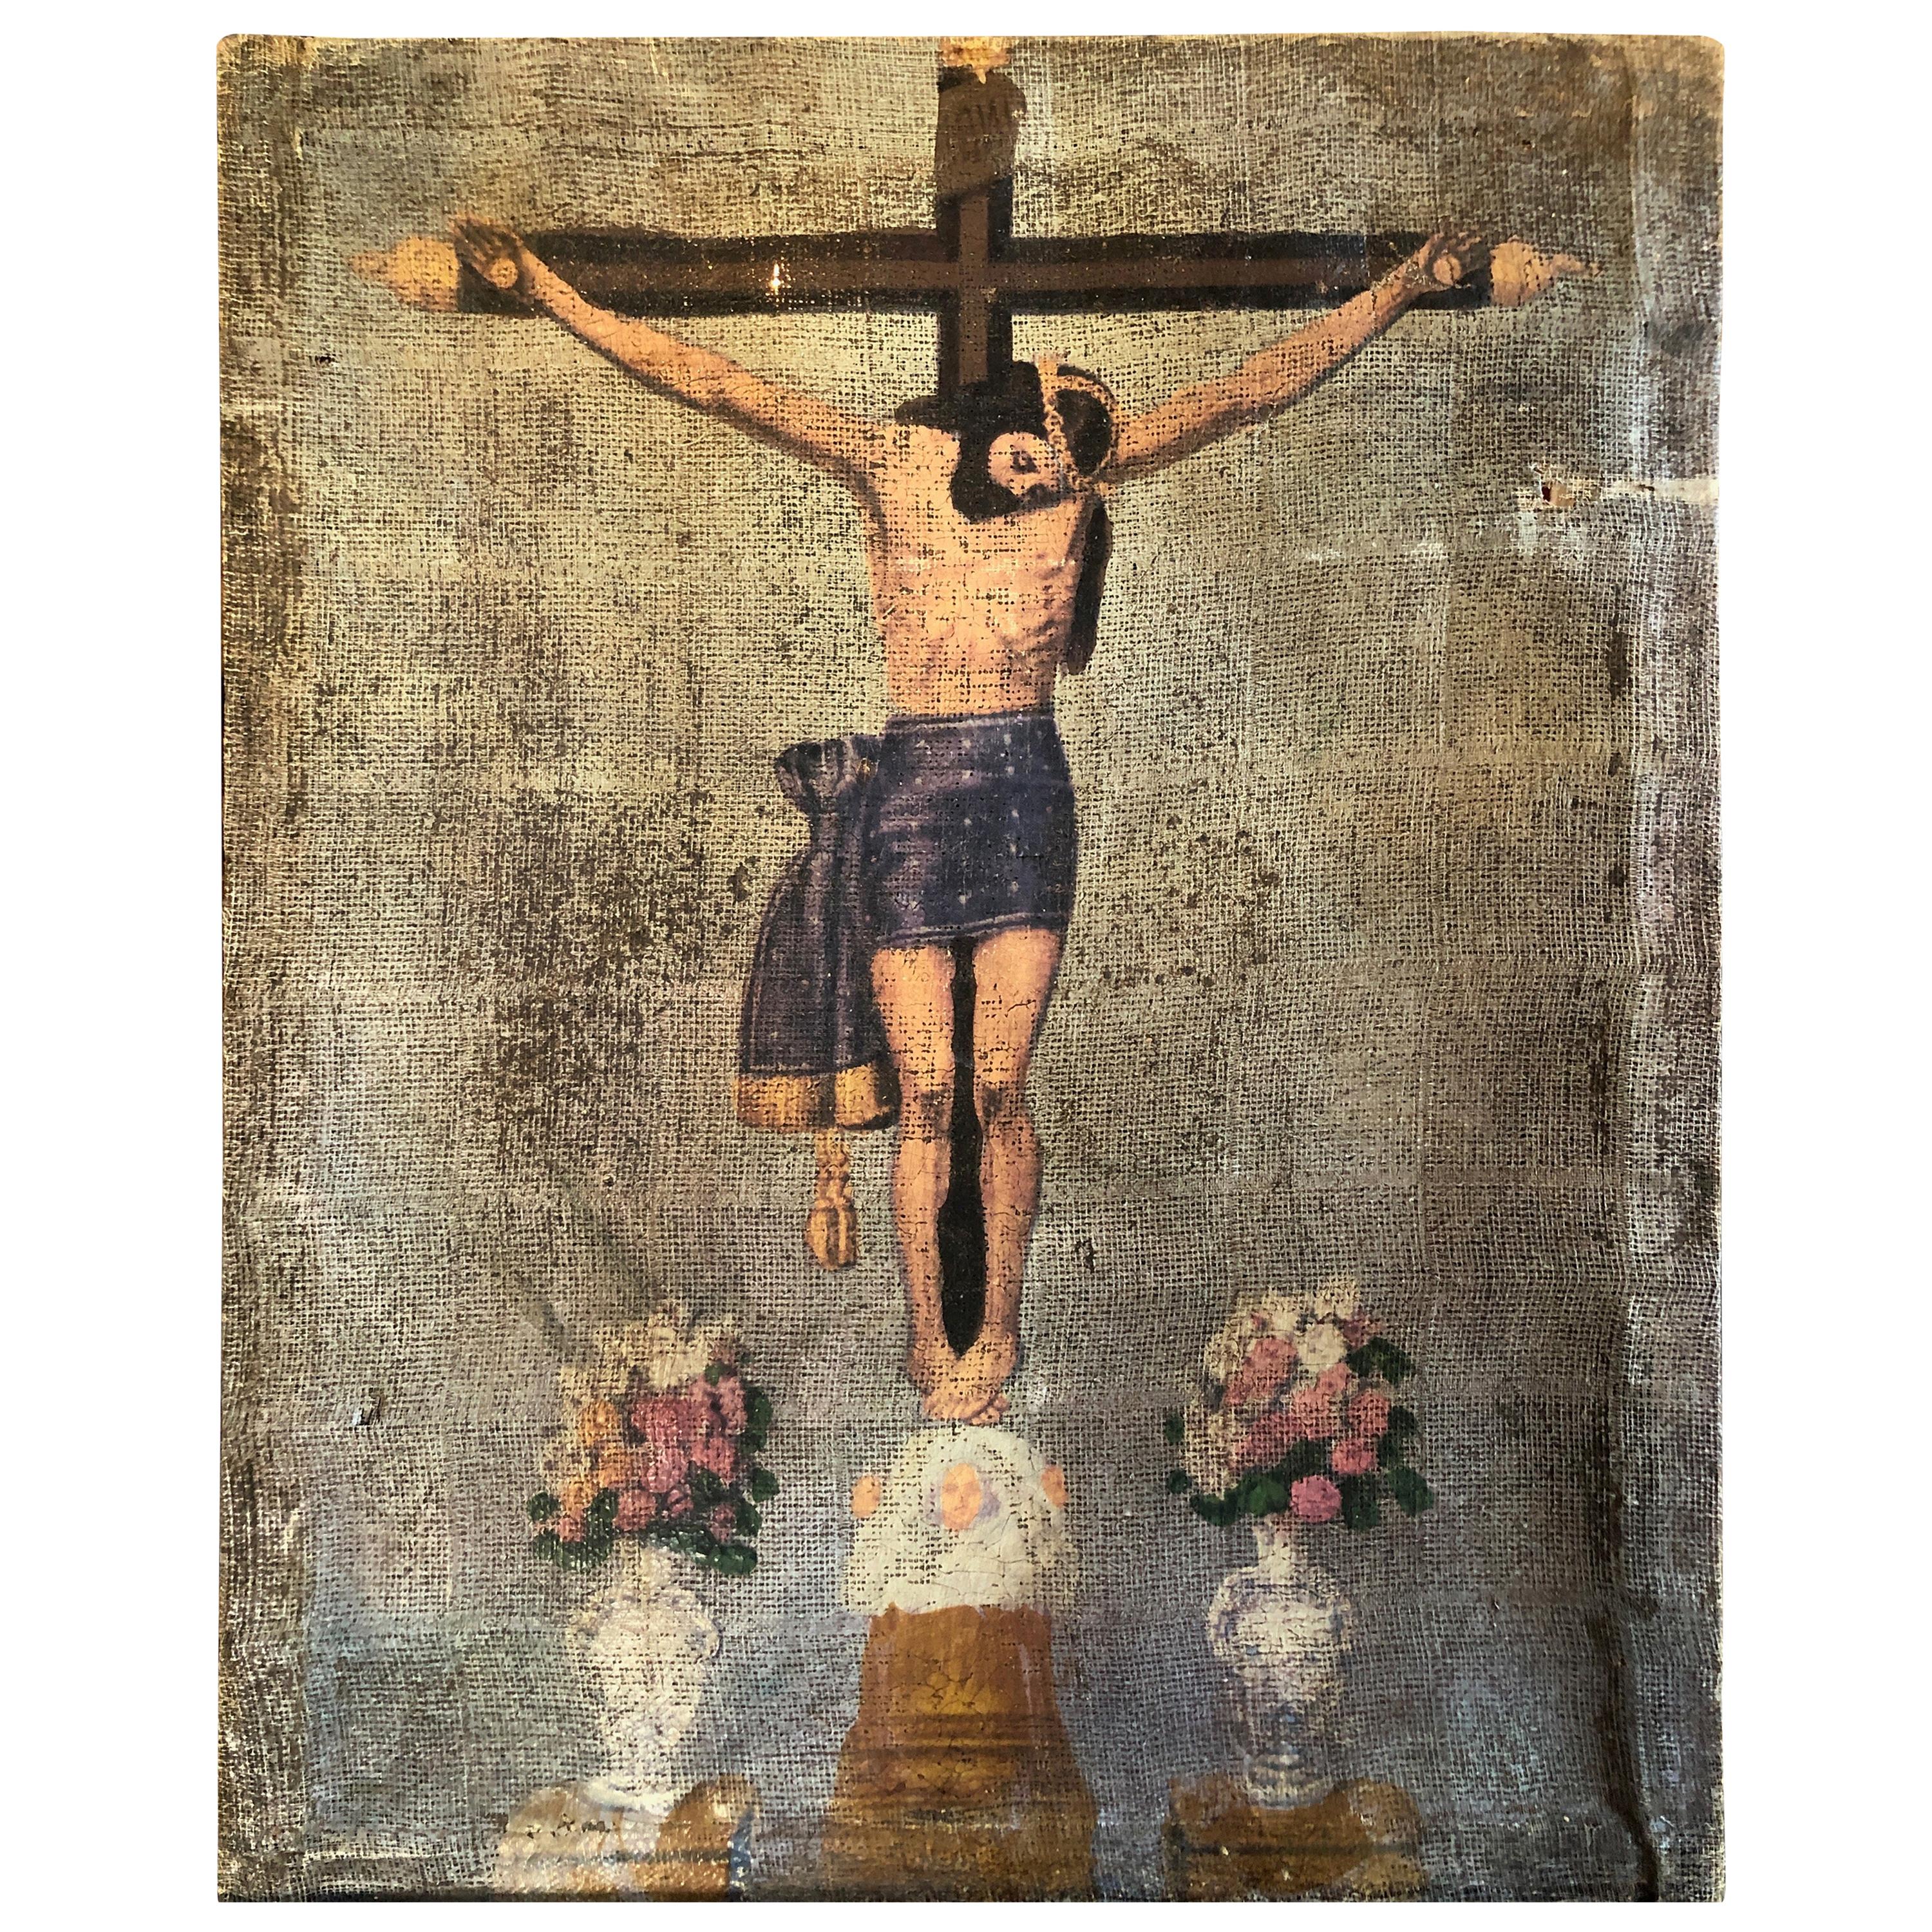 Turn of the Century Painting of the Crucifixion of Christ on Cloth